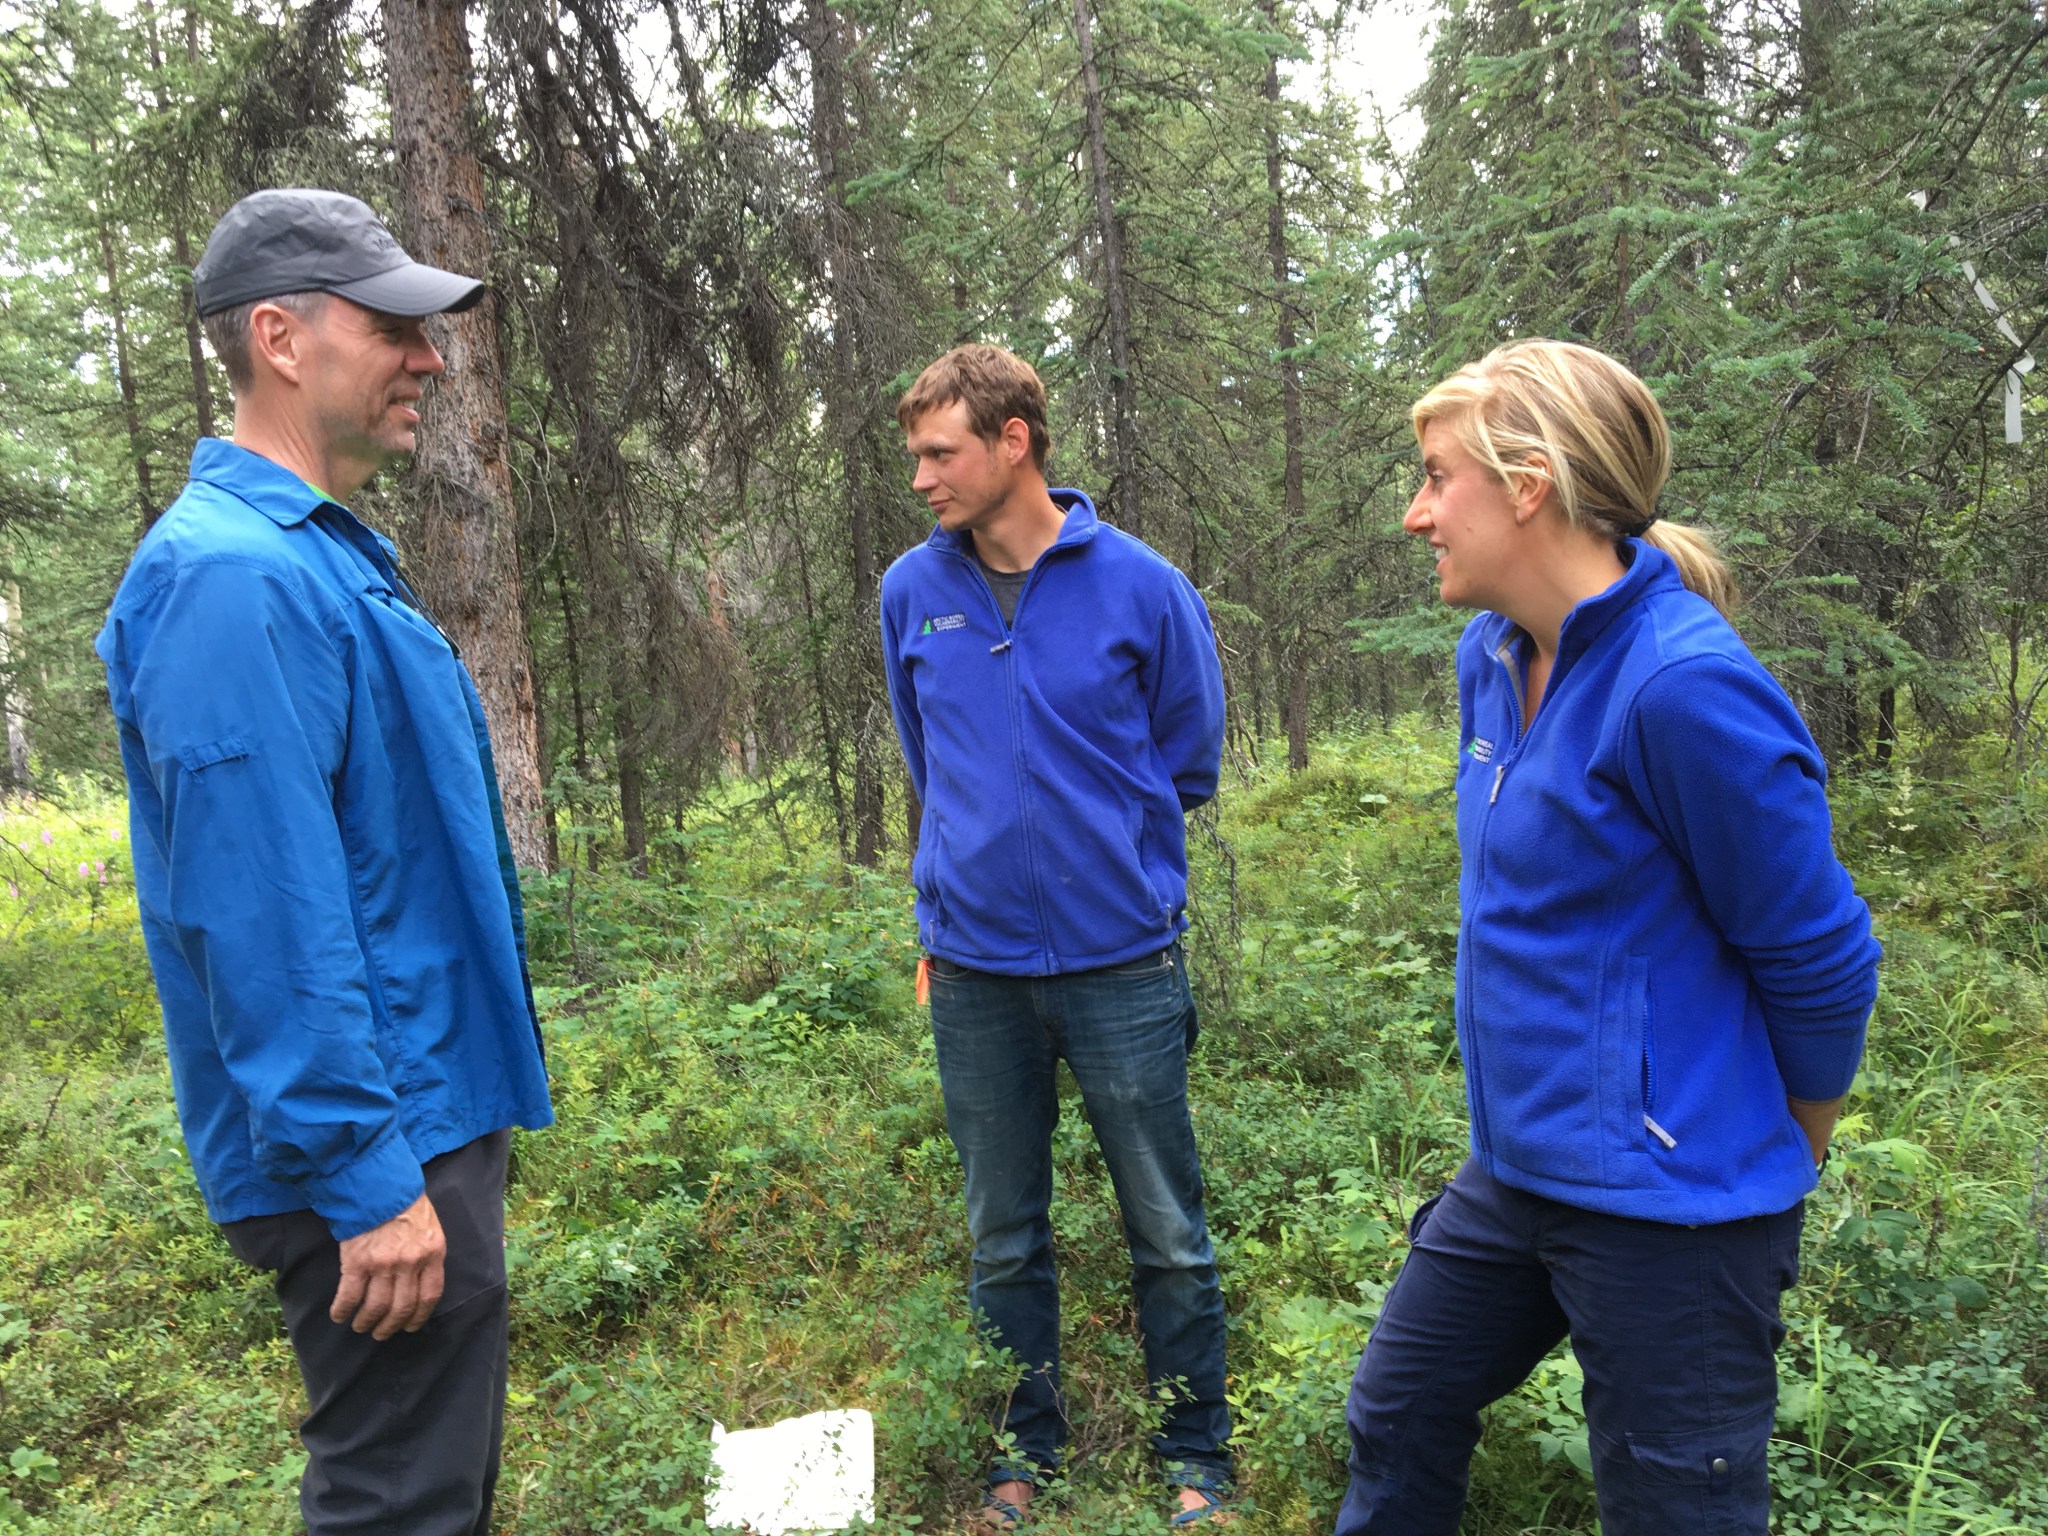 Dr. Peter Griffith stands with two colleagues in a forest, doing field research. All three wear bright blue jackets with NASA'S "ABoVE" project logo on the right chest, and Peter, a man with short gray hair, wears a gray baseball cap. The researchers stand in dense, calf-high plant material, with tall, thin evergreens visible behind them. It is a cloudy day and the light is soft and diffuse.